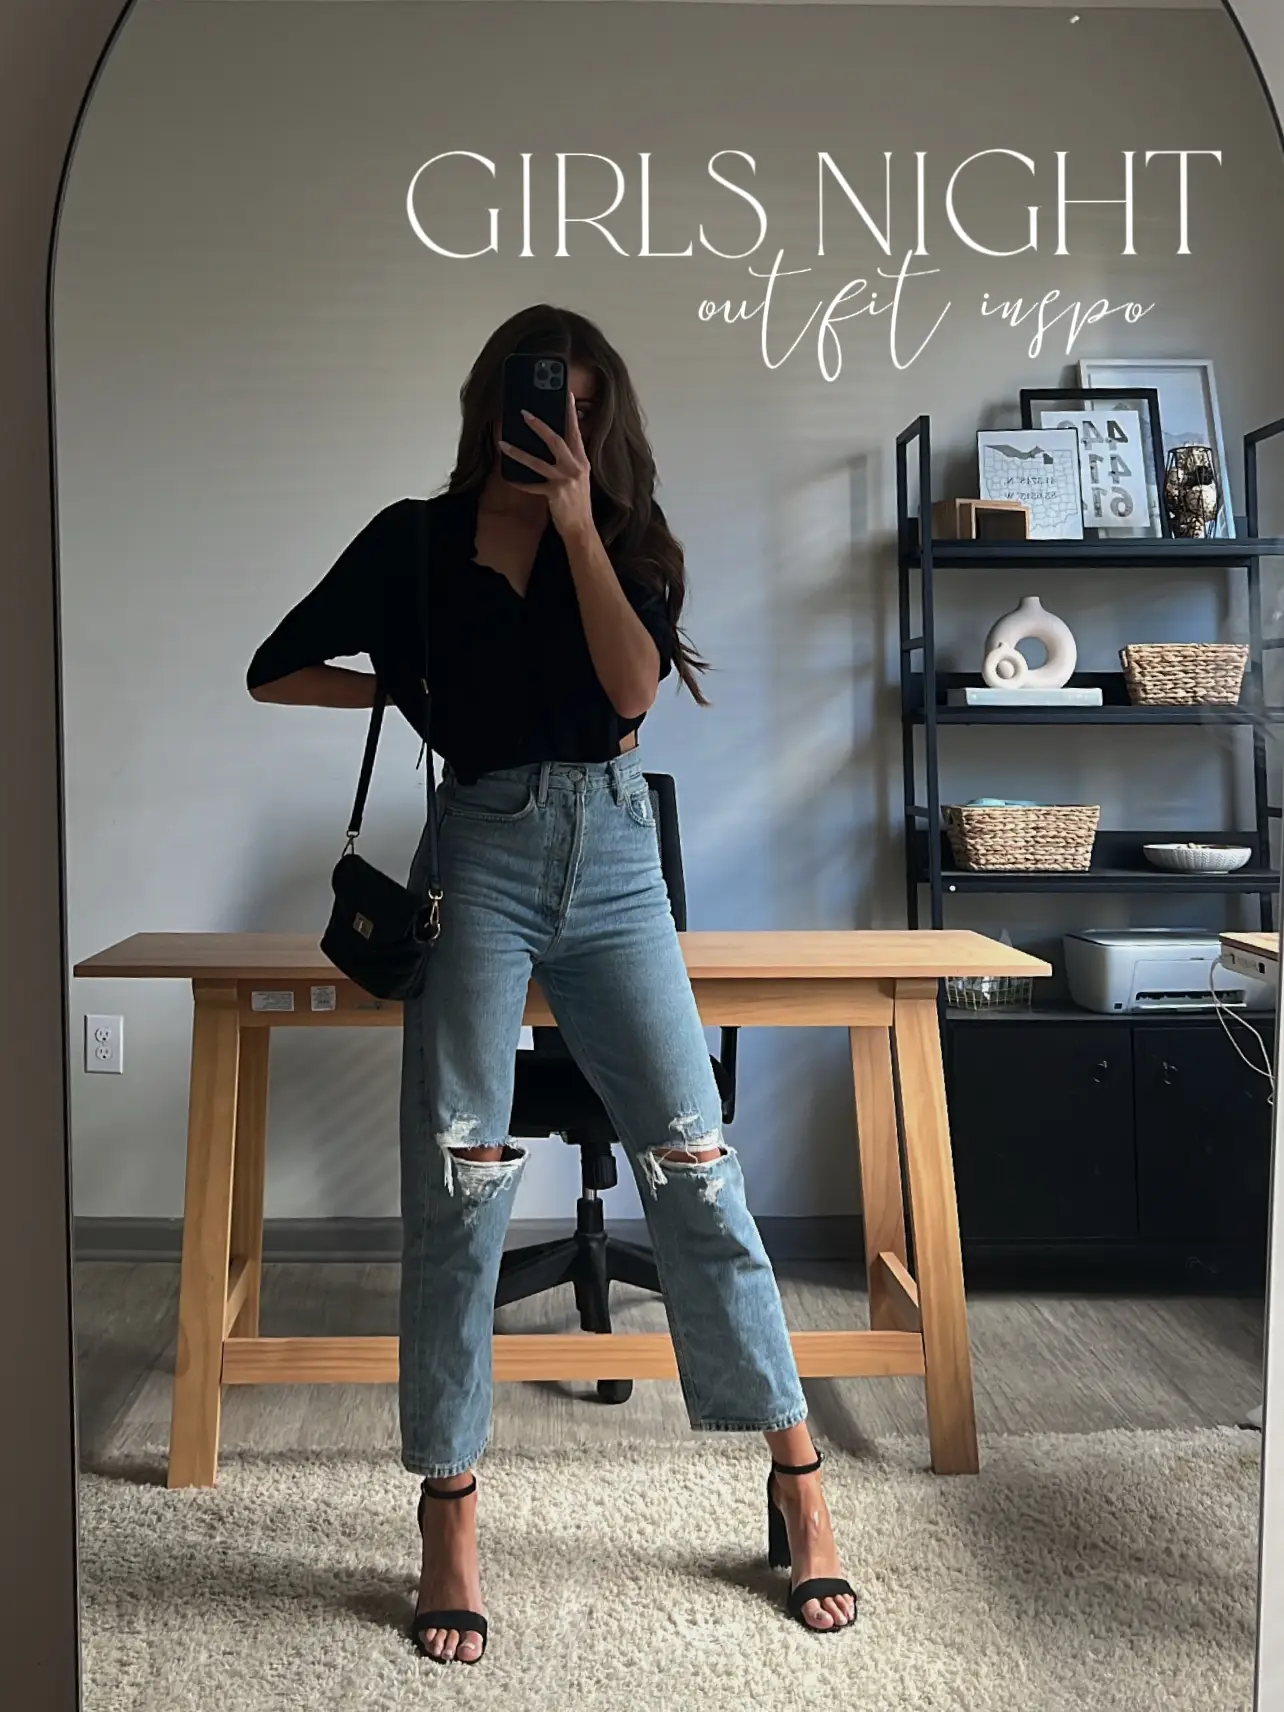 Girls night out fit